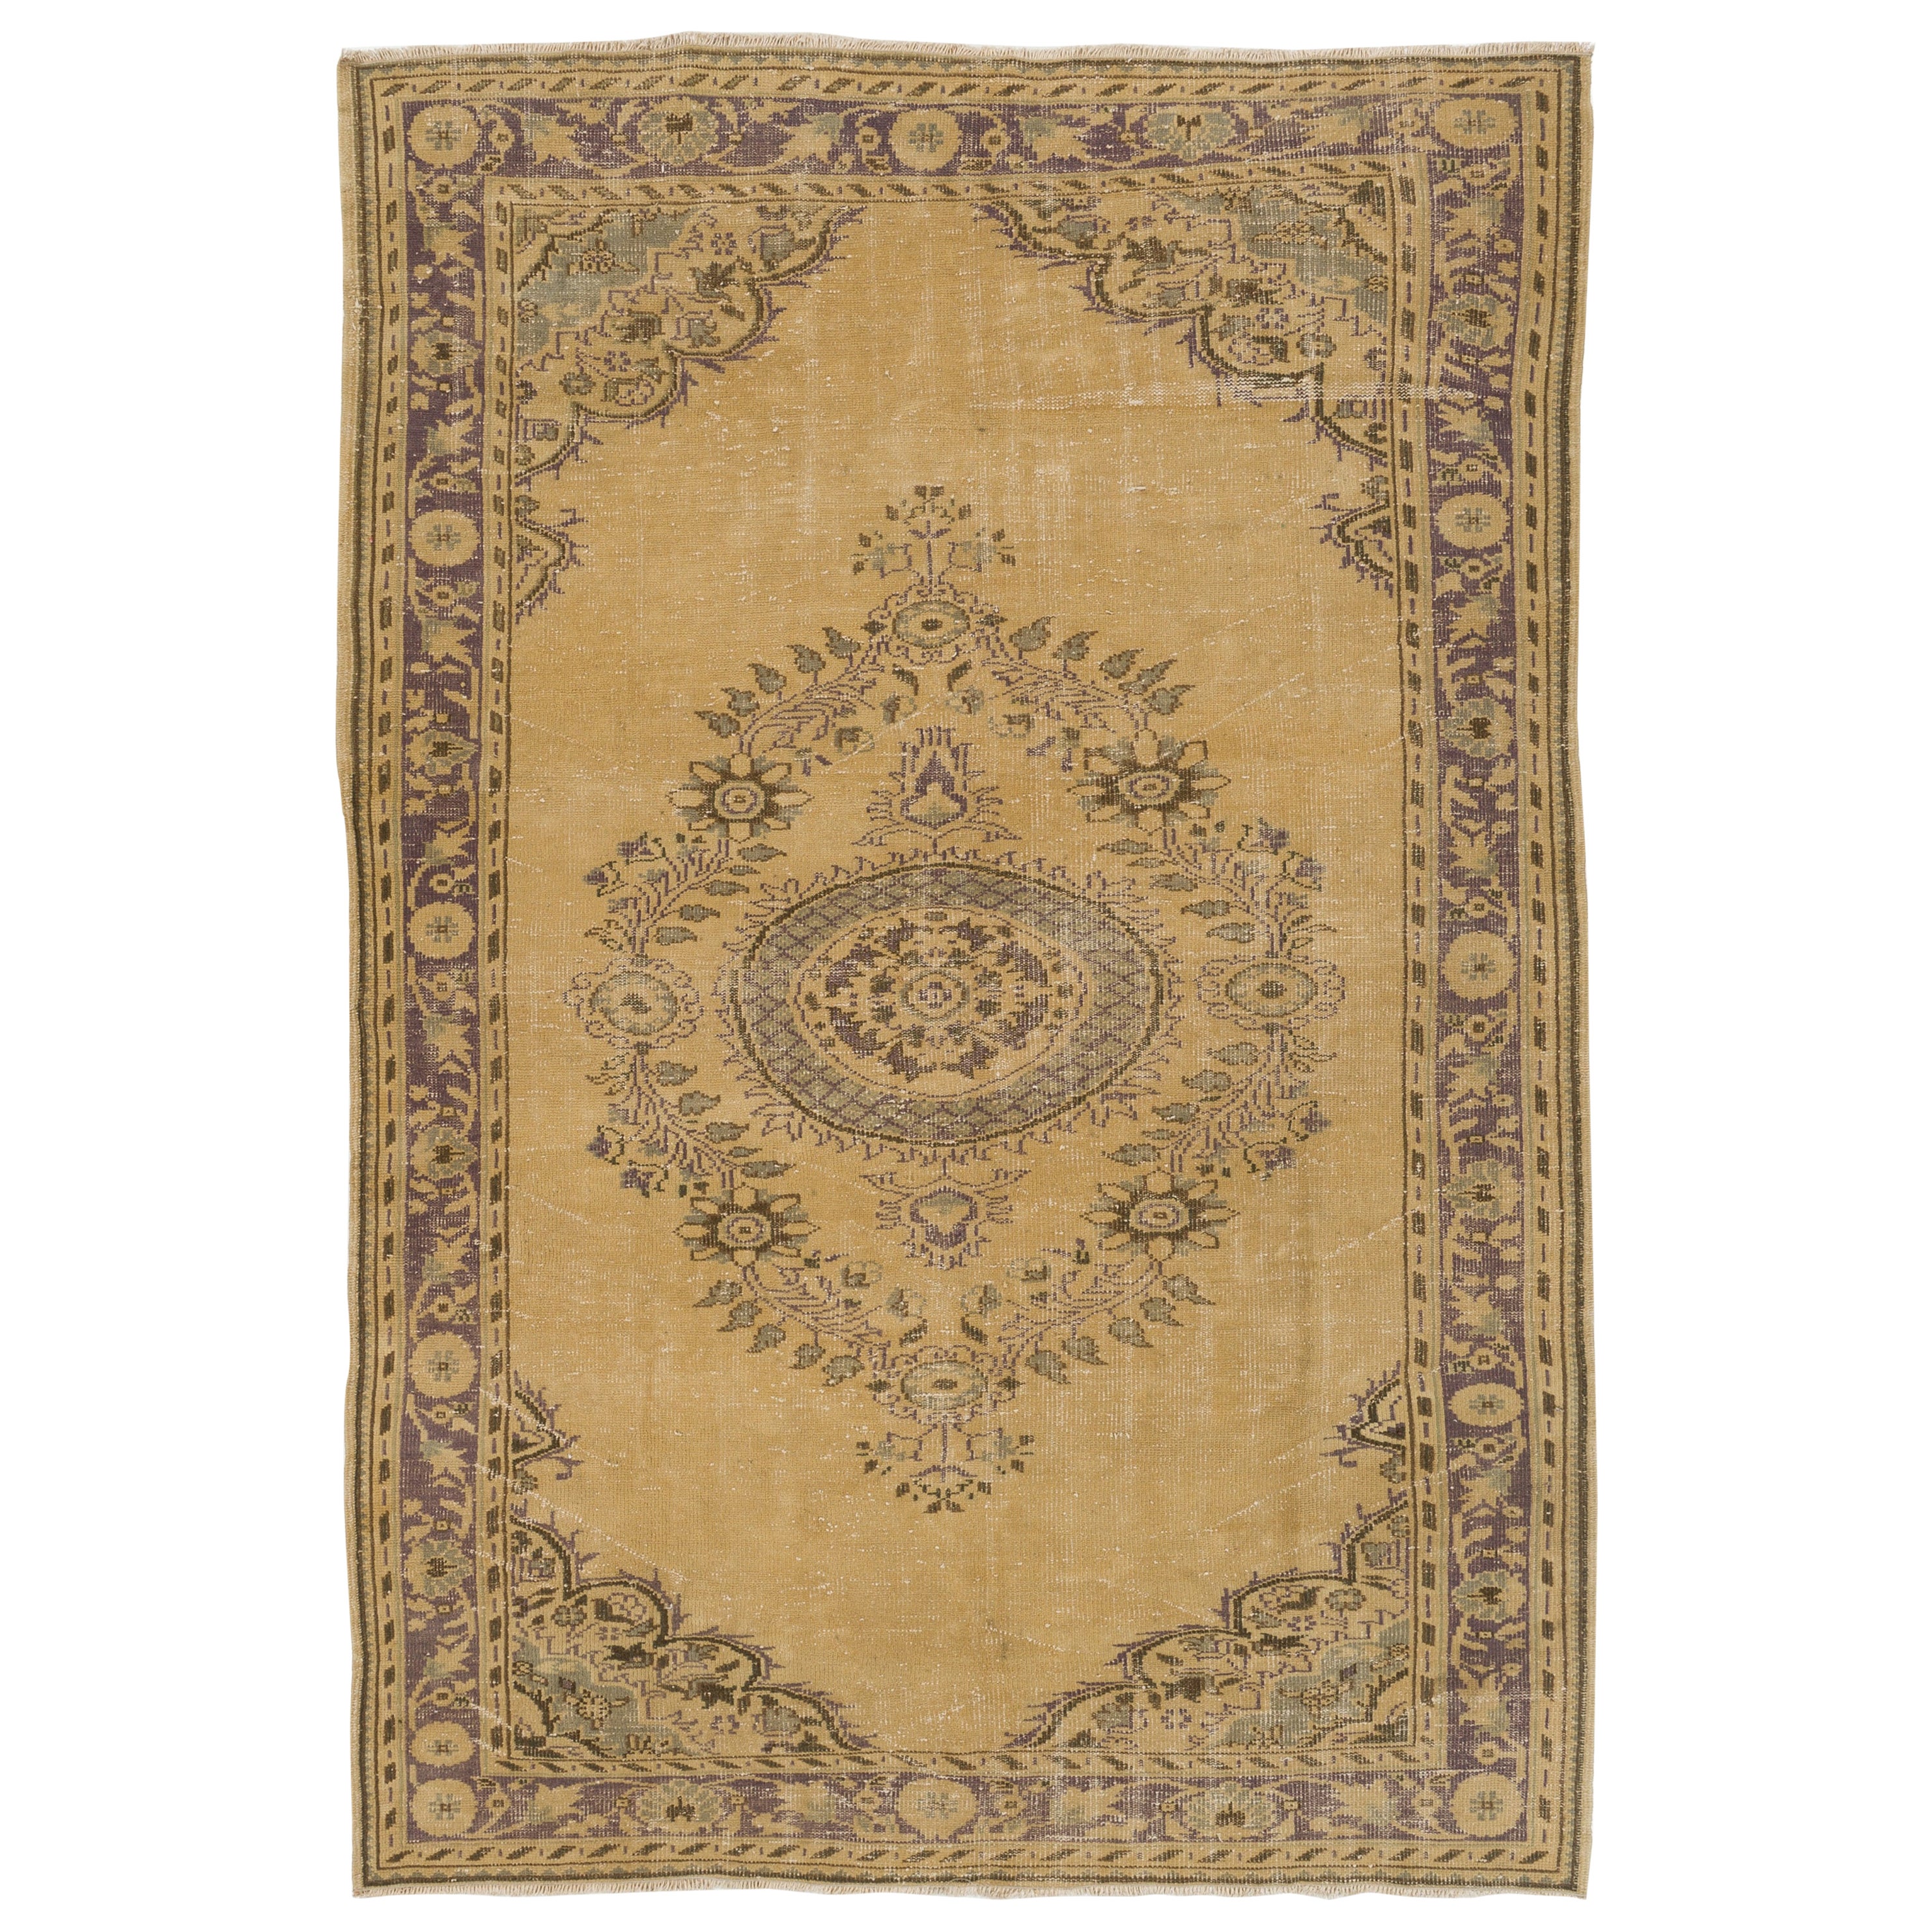 7x10 Ft Area Rug for Country Living Homes. Turkish Handmade Wool & Cotton Carpet For Sale